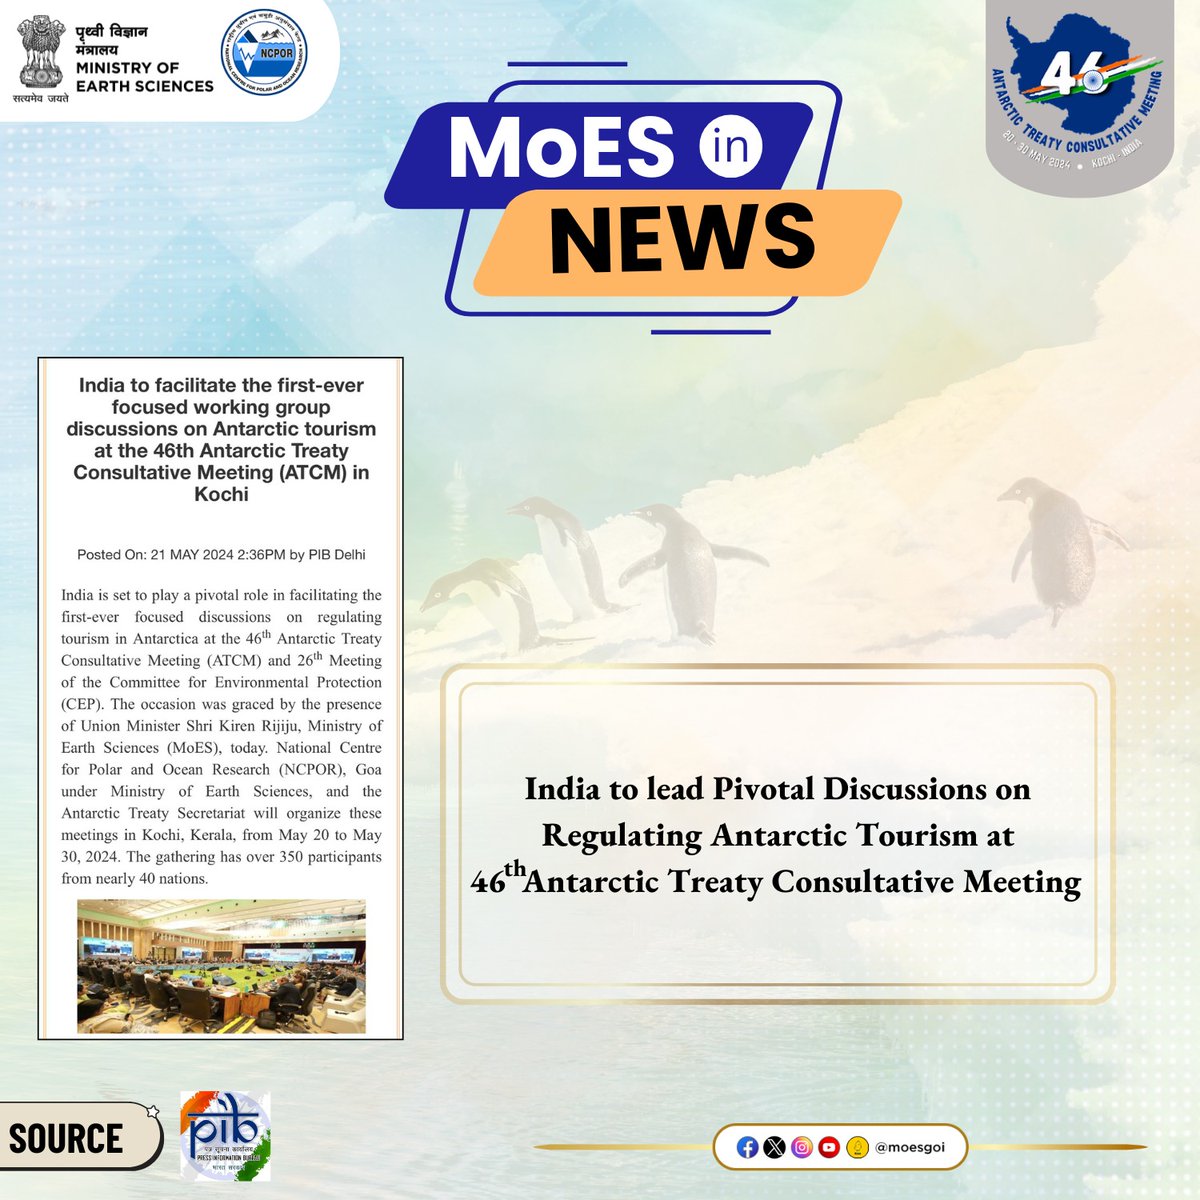 #MoESInNews
India through @ncaor_goa under @moesgoi is spearheading the first-ever focused discussions on regulating Antarctic tourism and hosting the 46th Antarctic Treaty Consultative Meeting (ATCM).